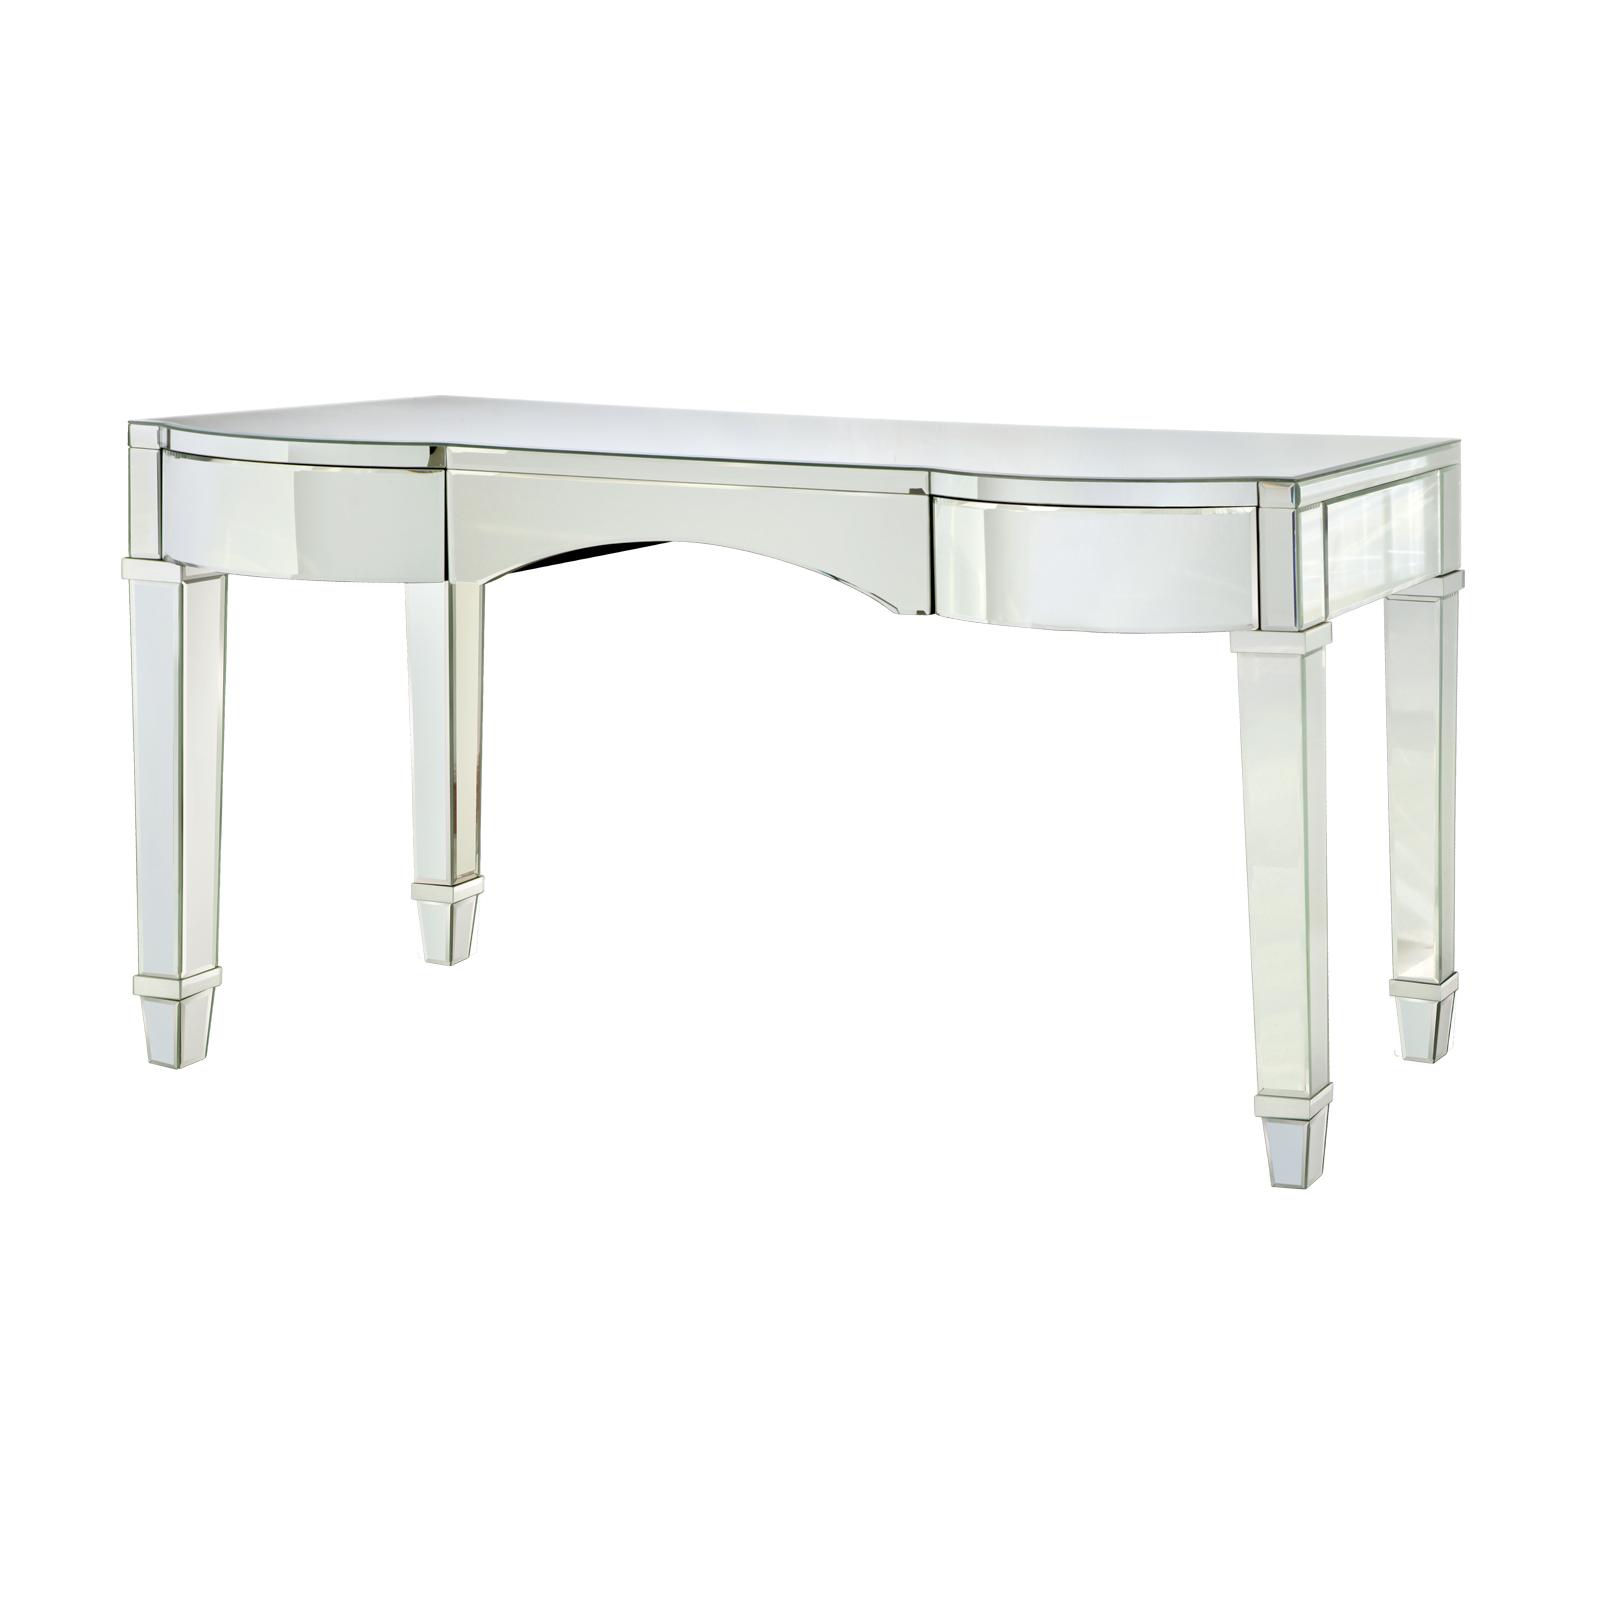 the fantastic unbelievable threshold mirrored accent table with modclair desks cecilia desk mirror drawer vintage circular glass top replacement wedding linens southwestern lamps